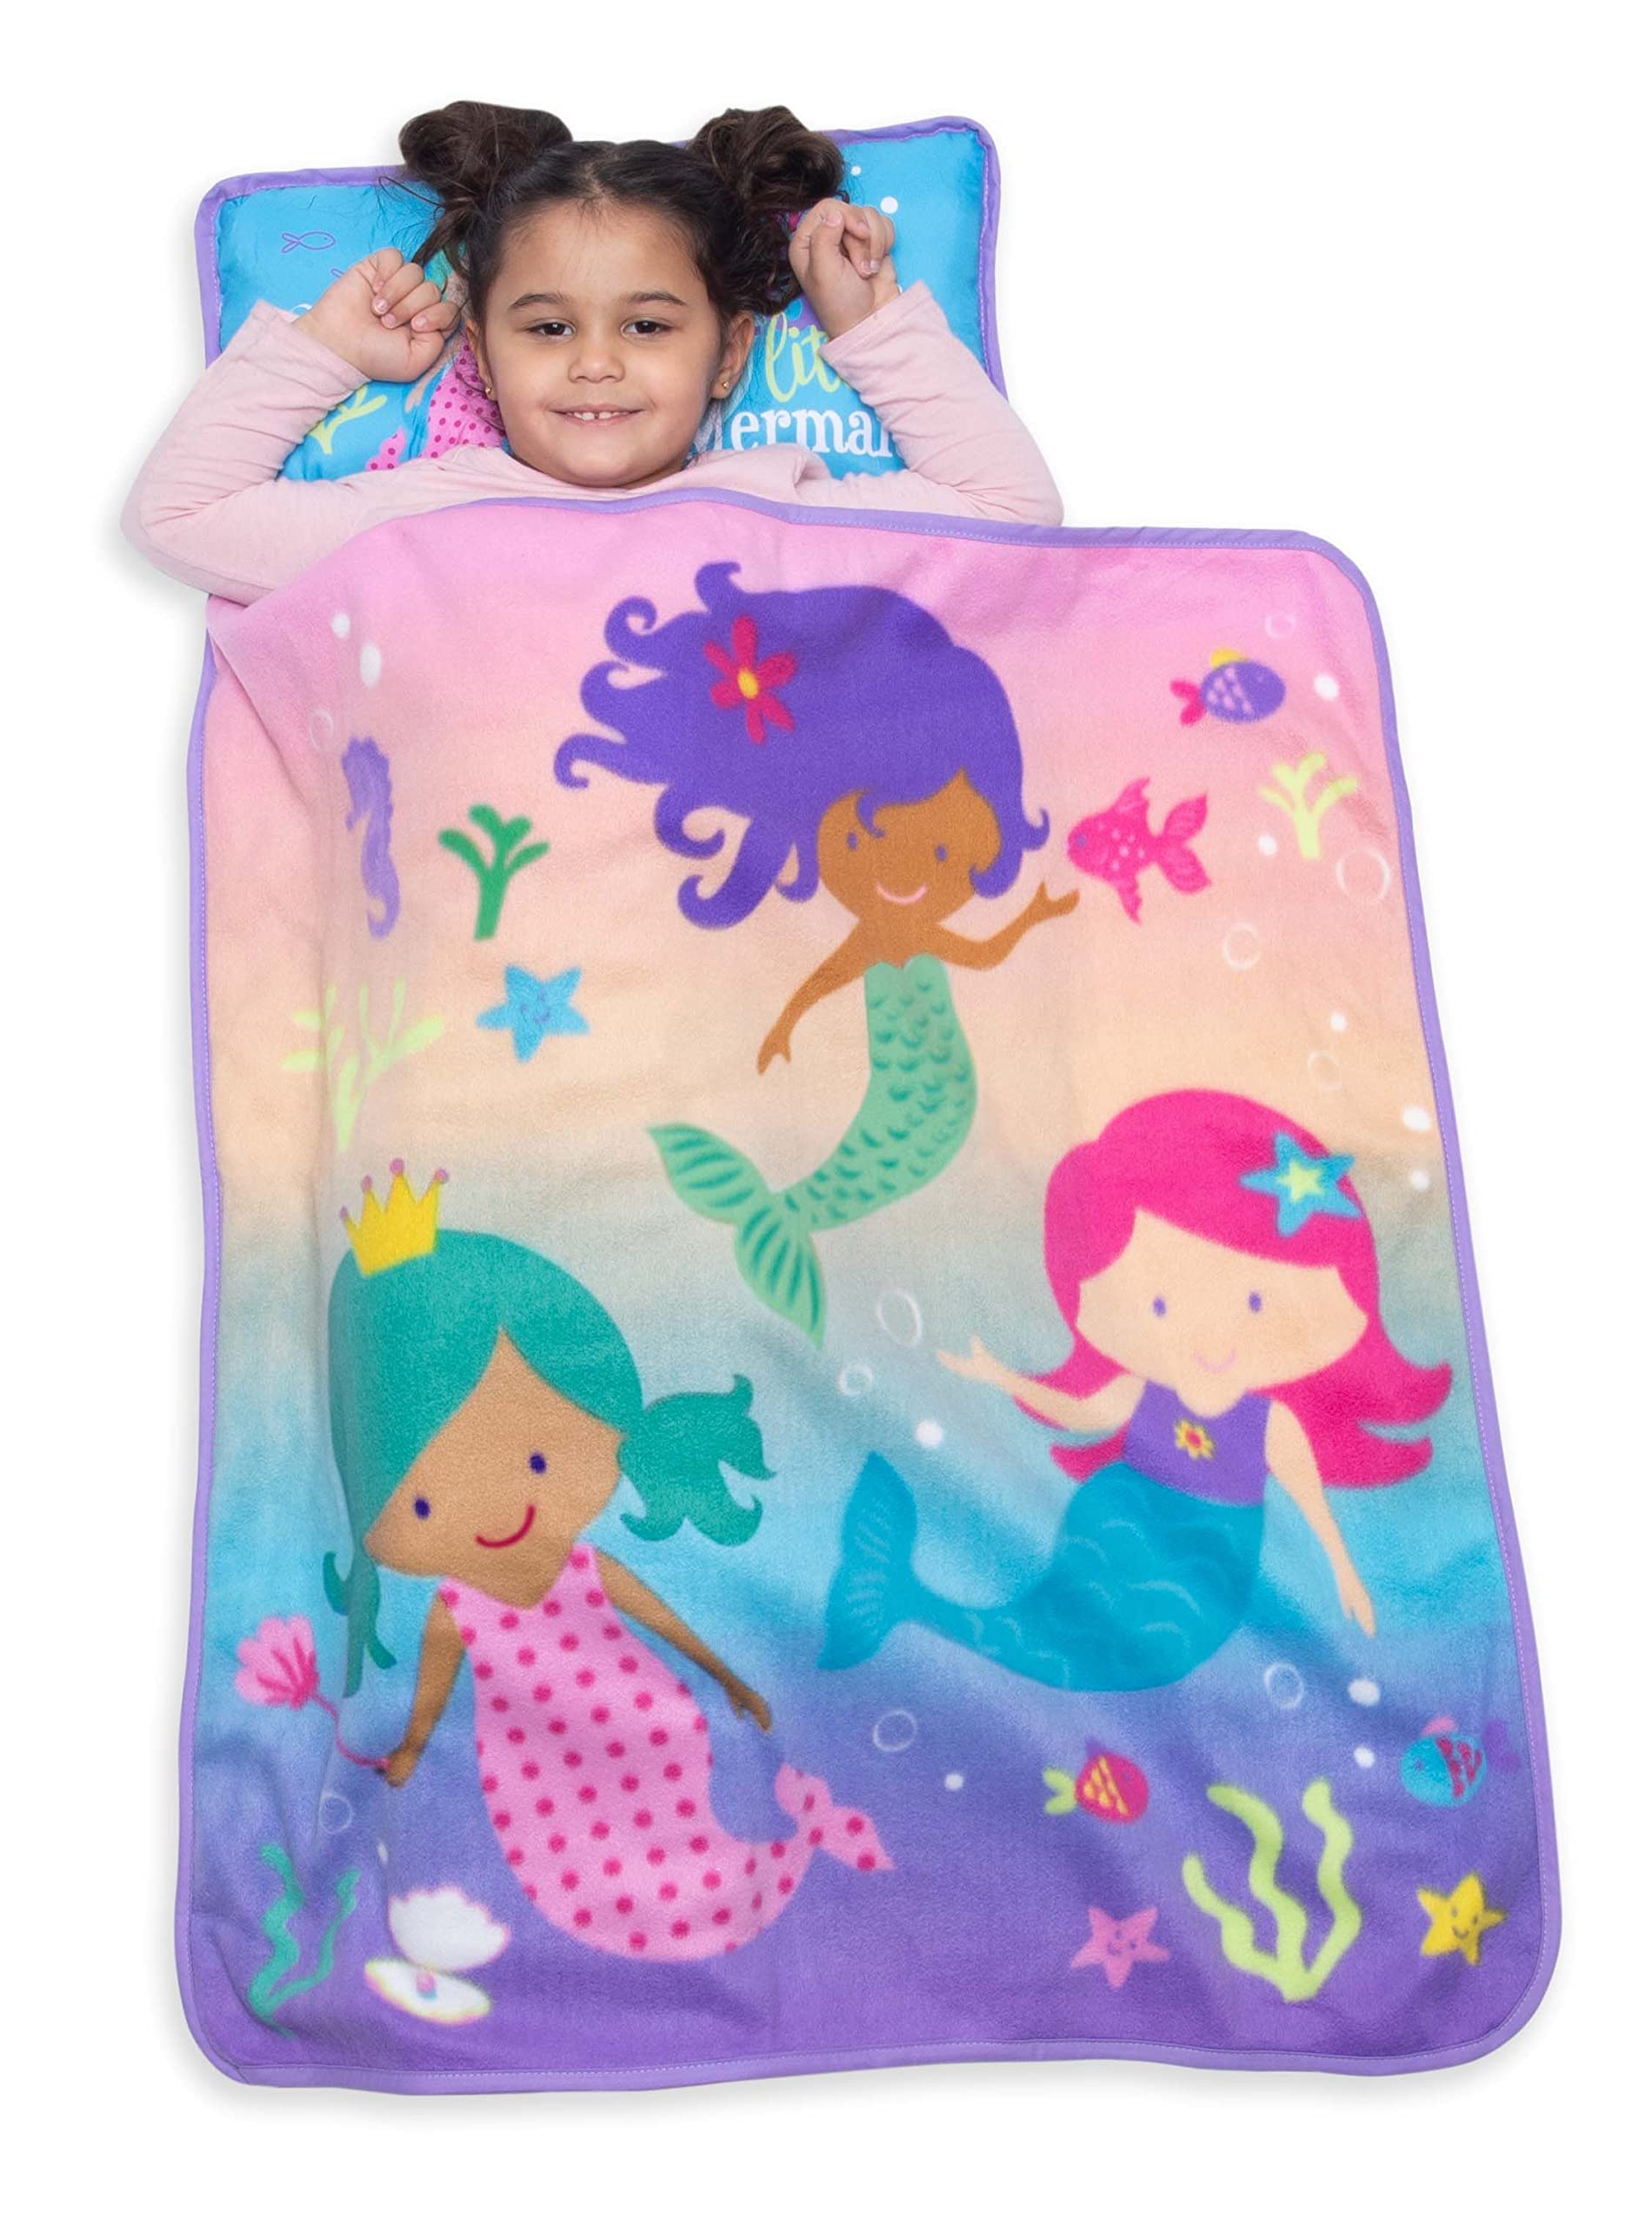 Baby Boom Funhouse Mermaid Kids Nap Mat Set - Includes Pillow and Fleece Blanket - great for girls Napping During Daycare, Presc